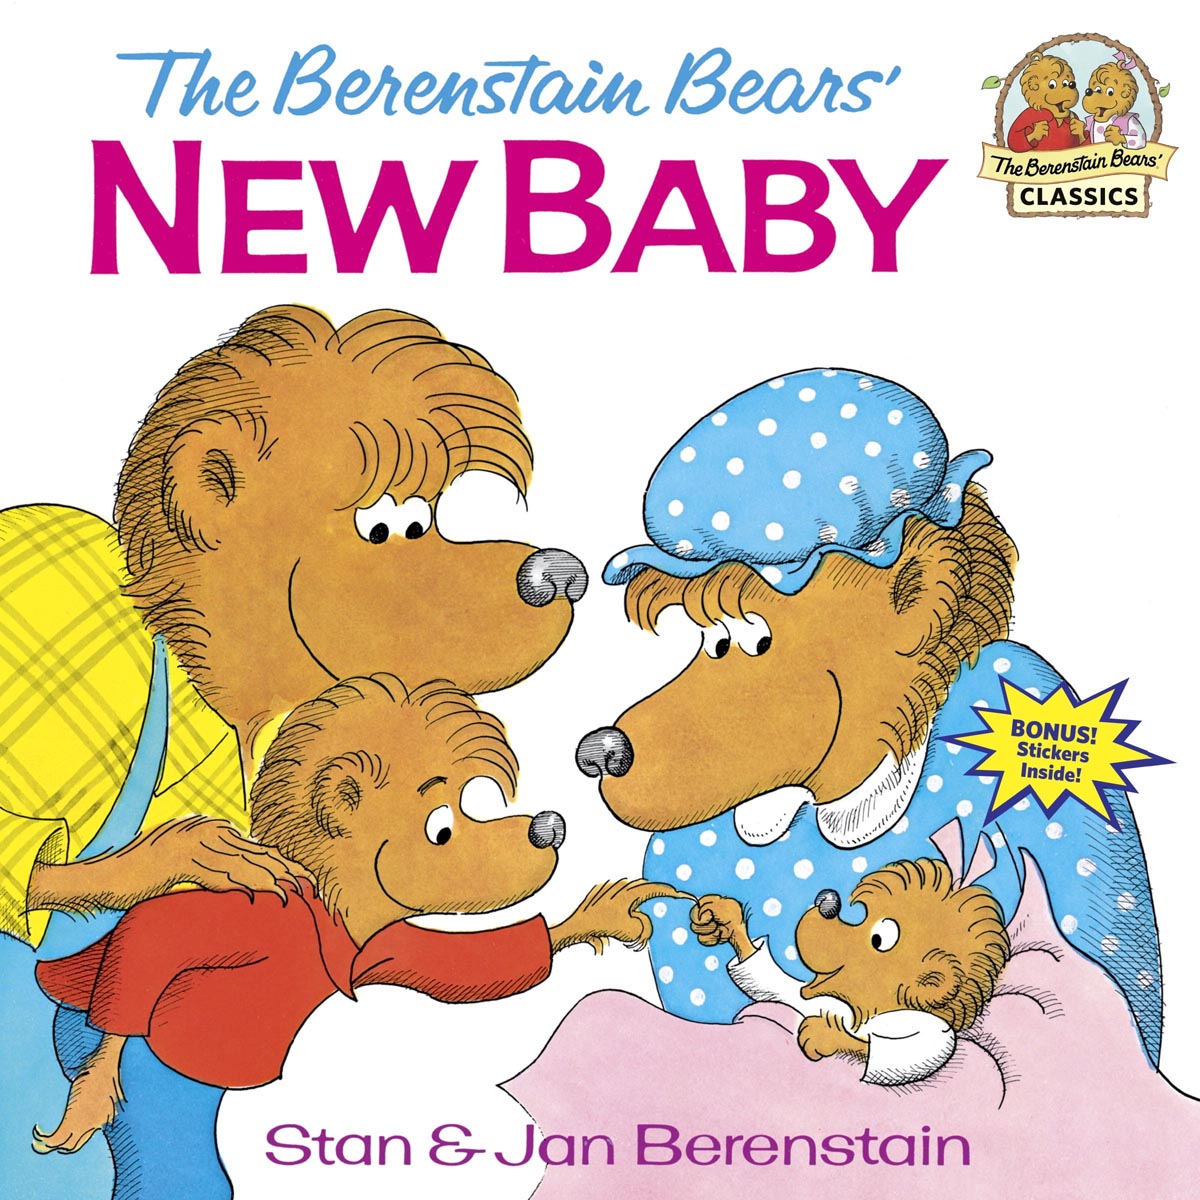 Cover of “The Berenstain Bears’ New Baby”